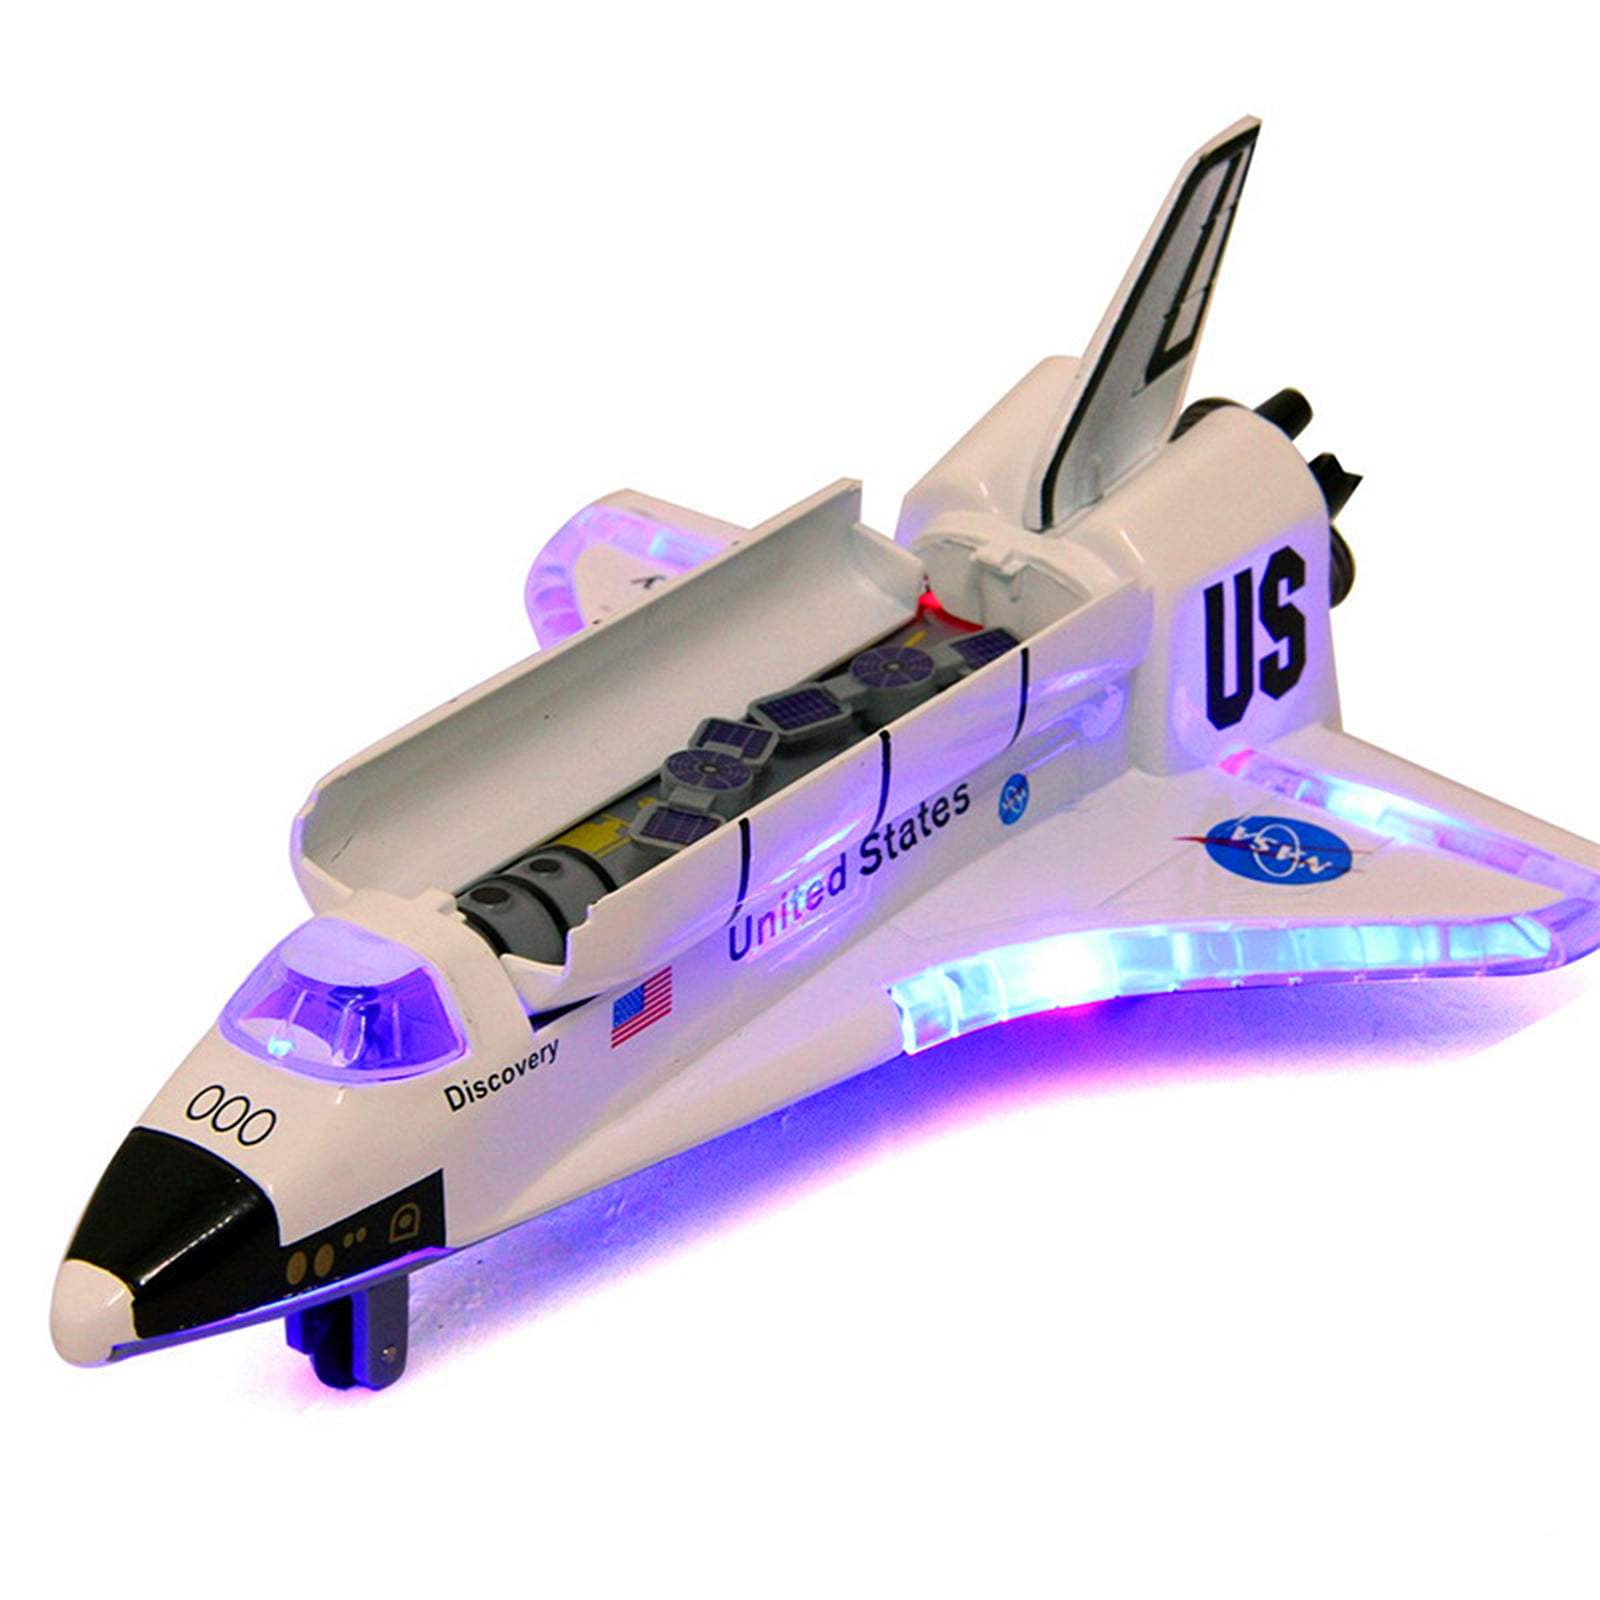 USA NASA Space Shuttle Discovery COLUMBIA 8" with Light & Sound Diecast Model 